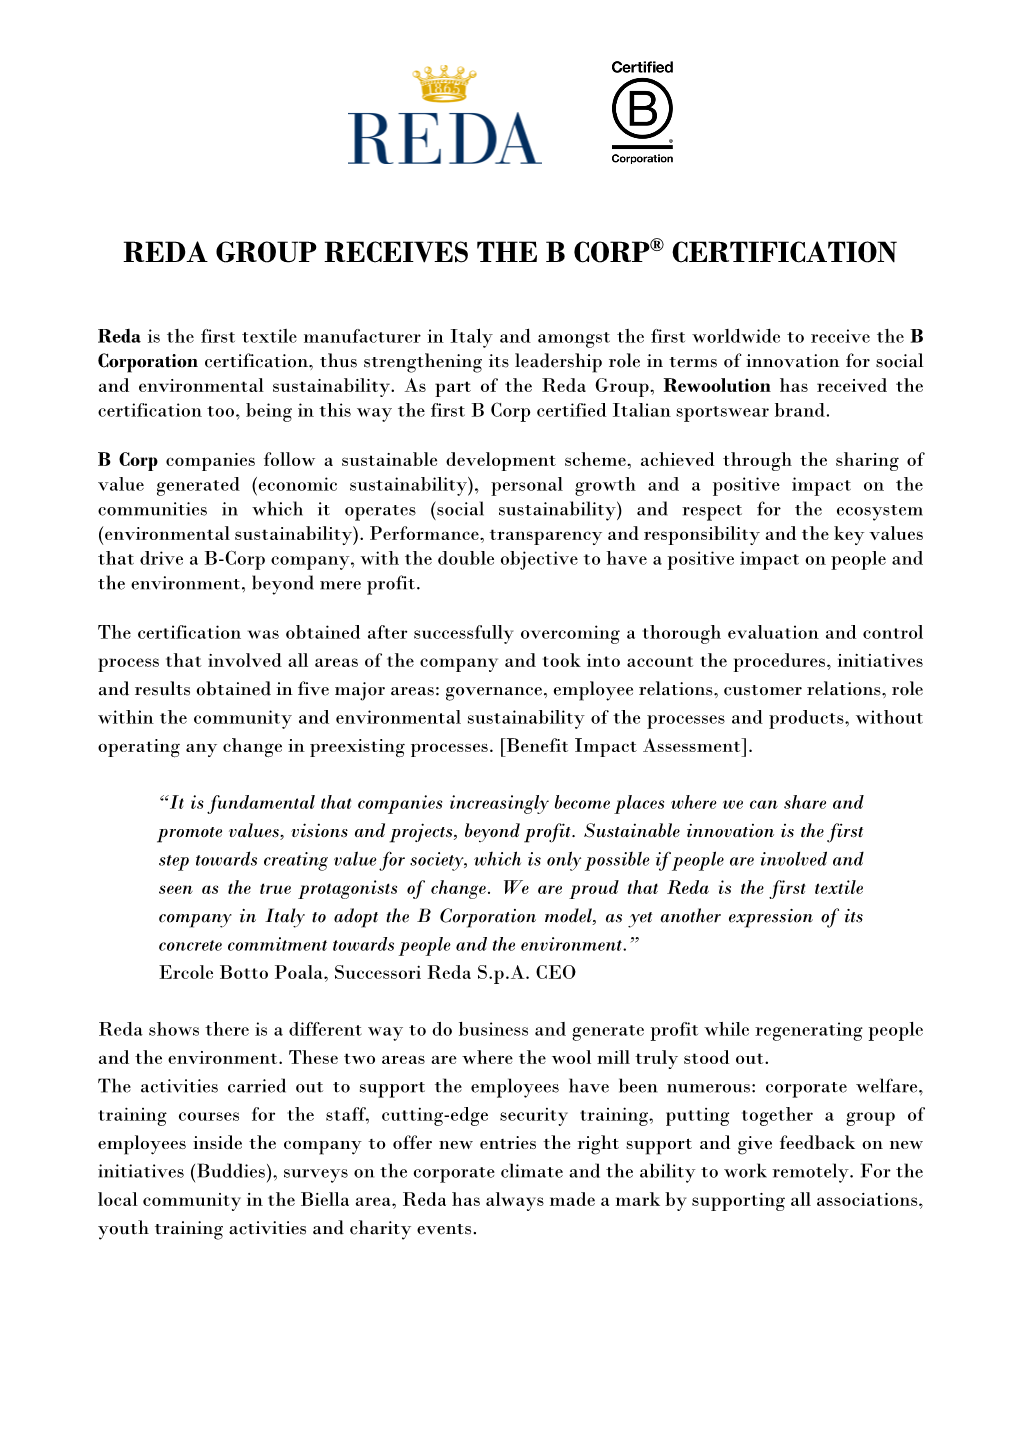 Reda Group Receives the B Corp® Certification